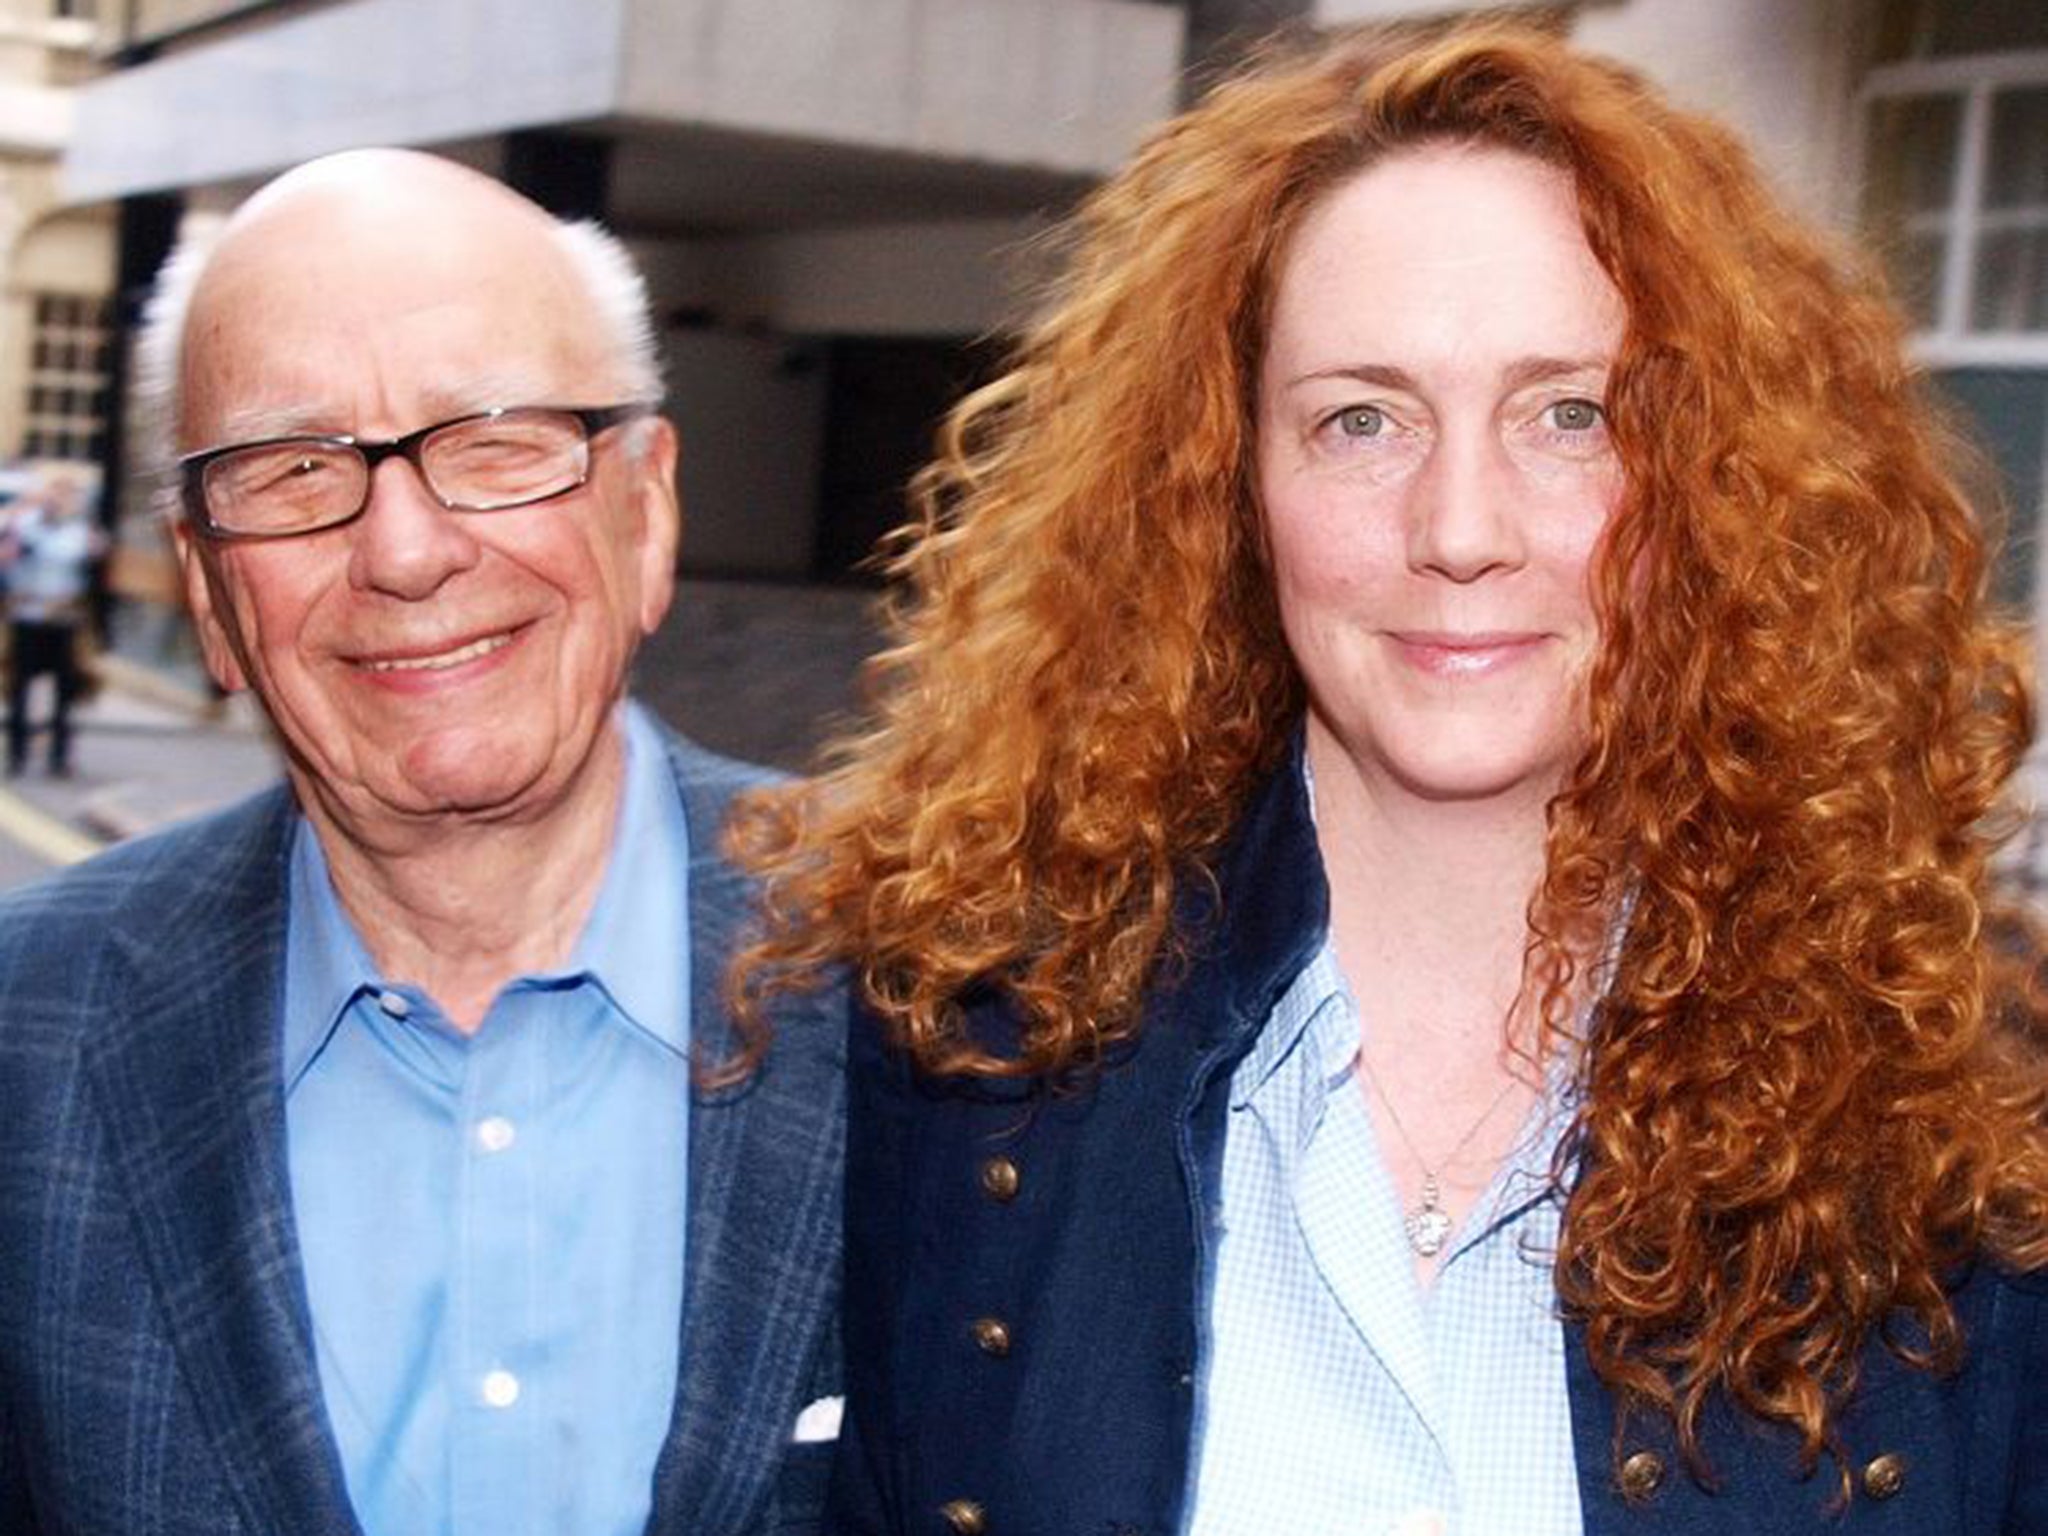 Rupert Murdoch has reappointed Rebekah Brooks, in defiance of those who criticised her performance in charge of the business during the phone-hacking scandal